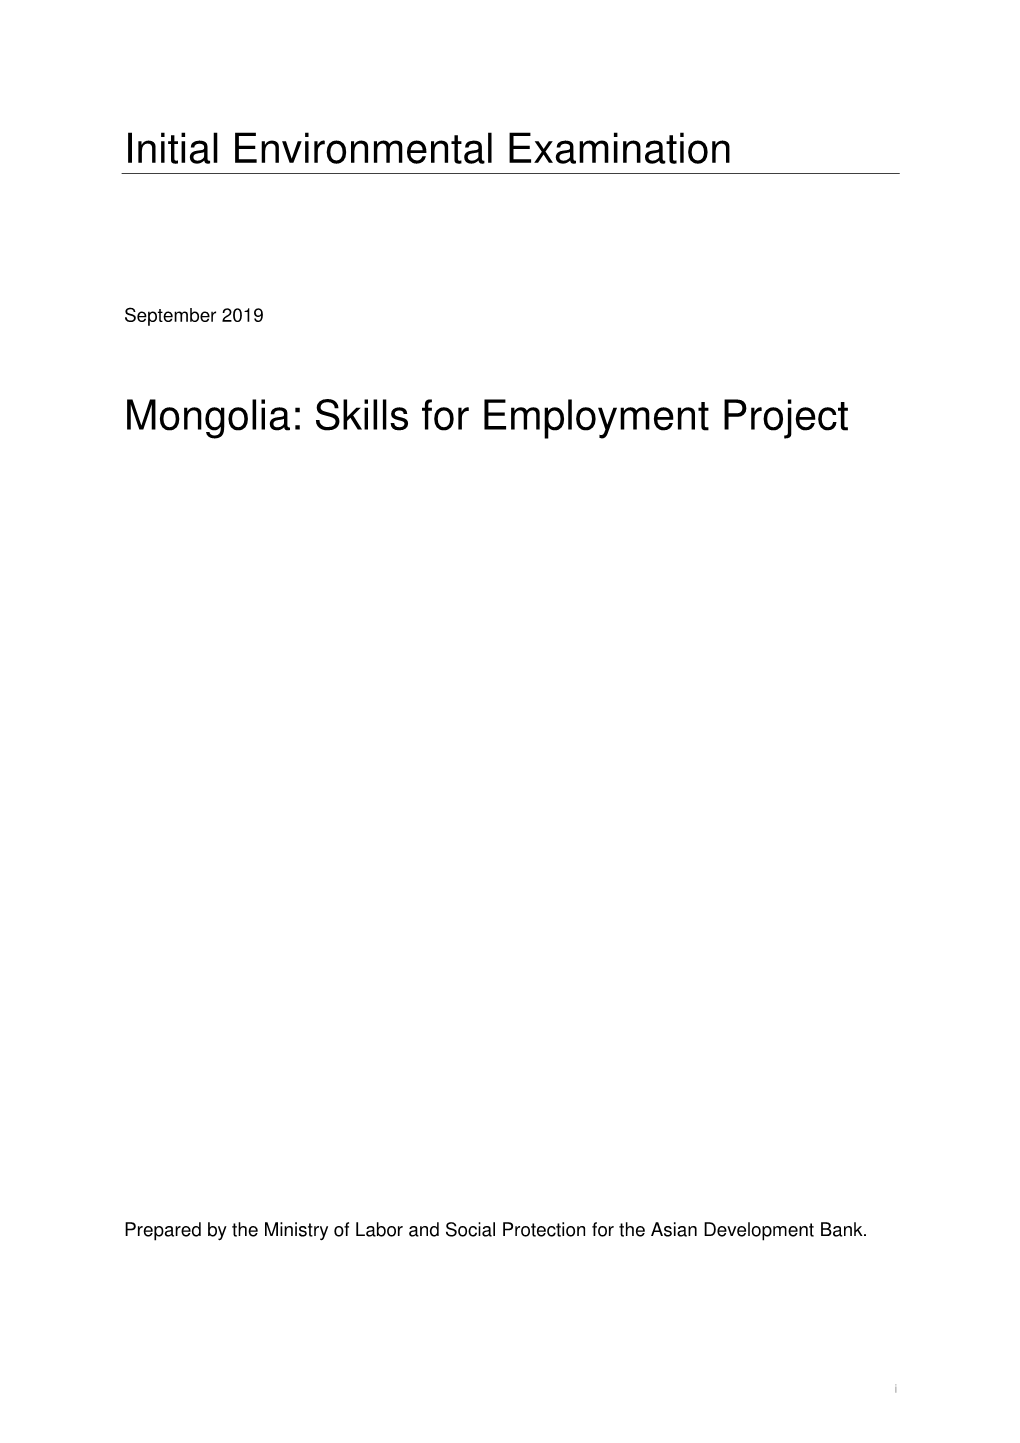 Skills for Employment Project: Initial Environmental Examination